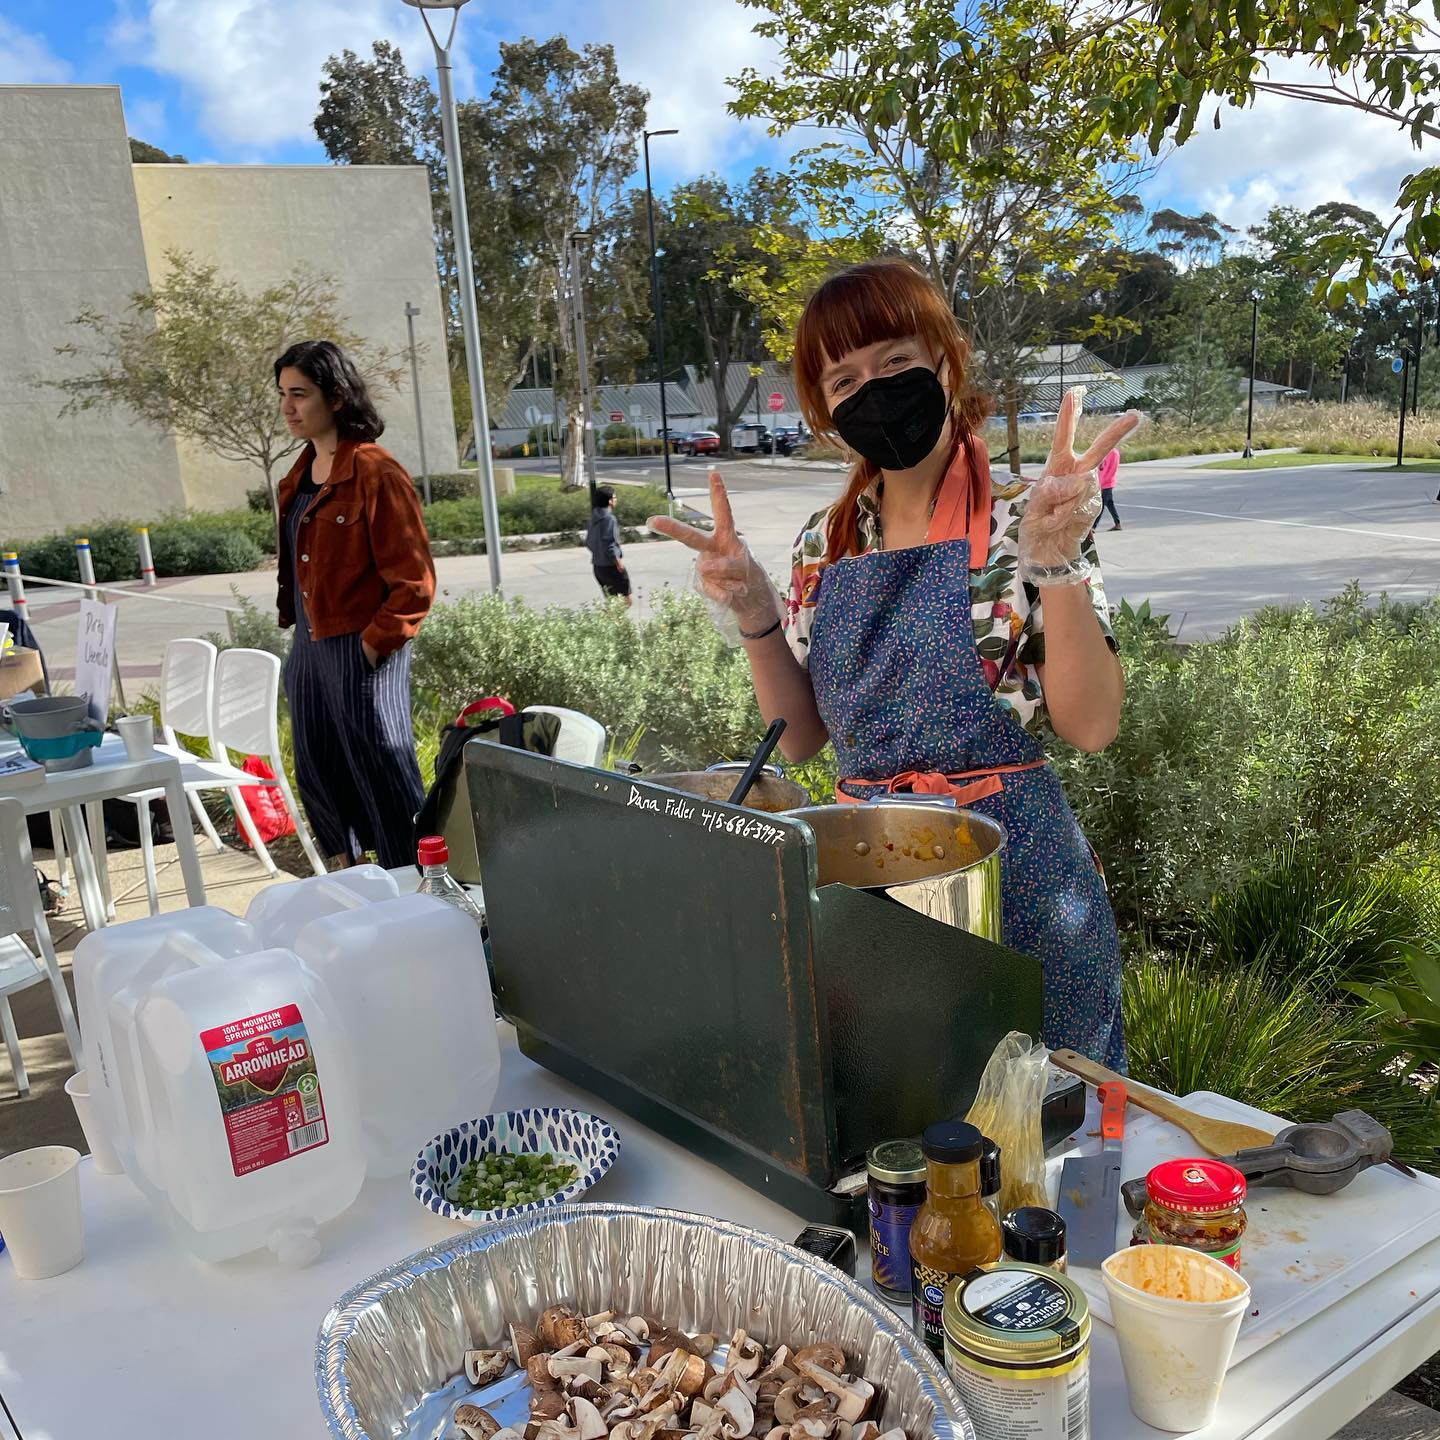 An outdoor area, partially paved and partially landscaped. A person, wearing a black face mask and an apron, makes two 'peace' signs with their plastic-gloved hands. In front of them is a gas camp stove, some jugs of water, a pan of mushrooms, and an assortment of jars. A person stands in the background, looking to the side.